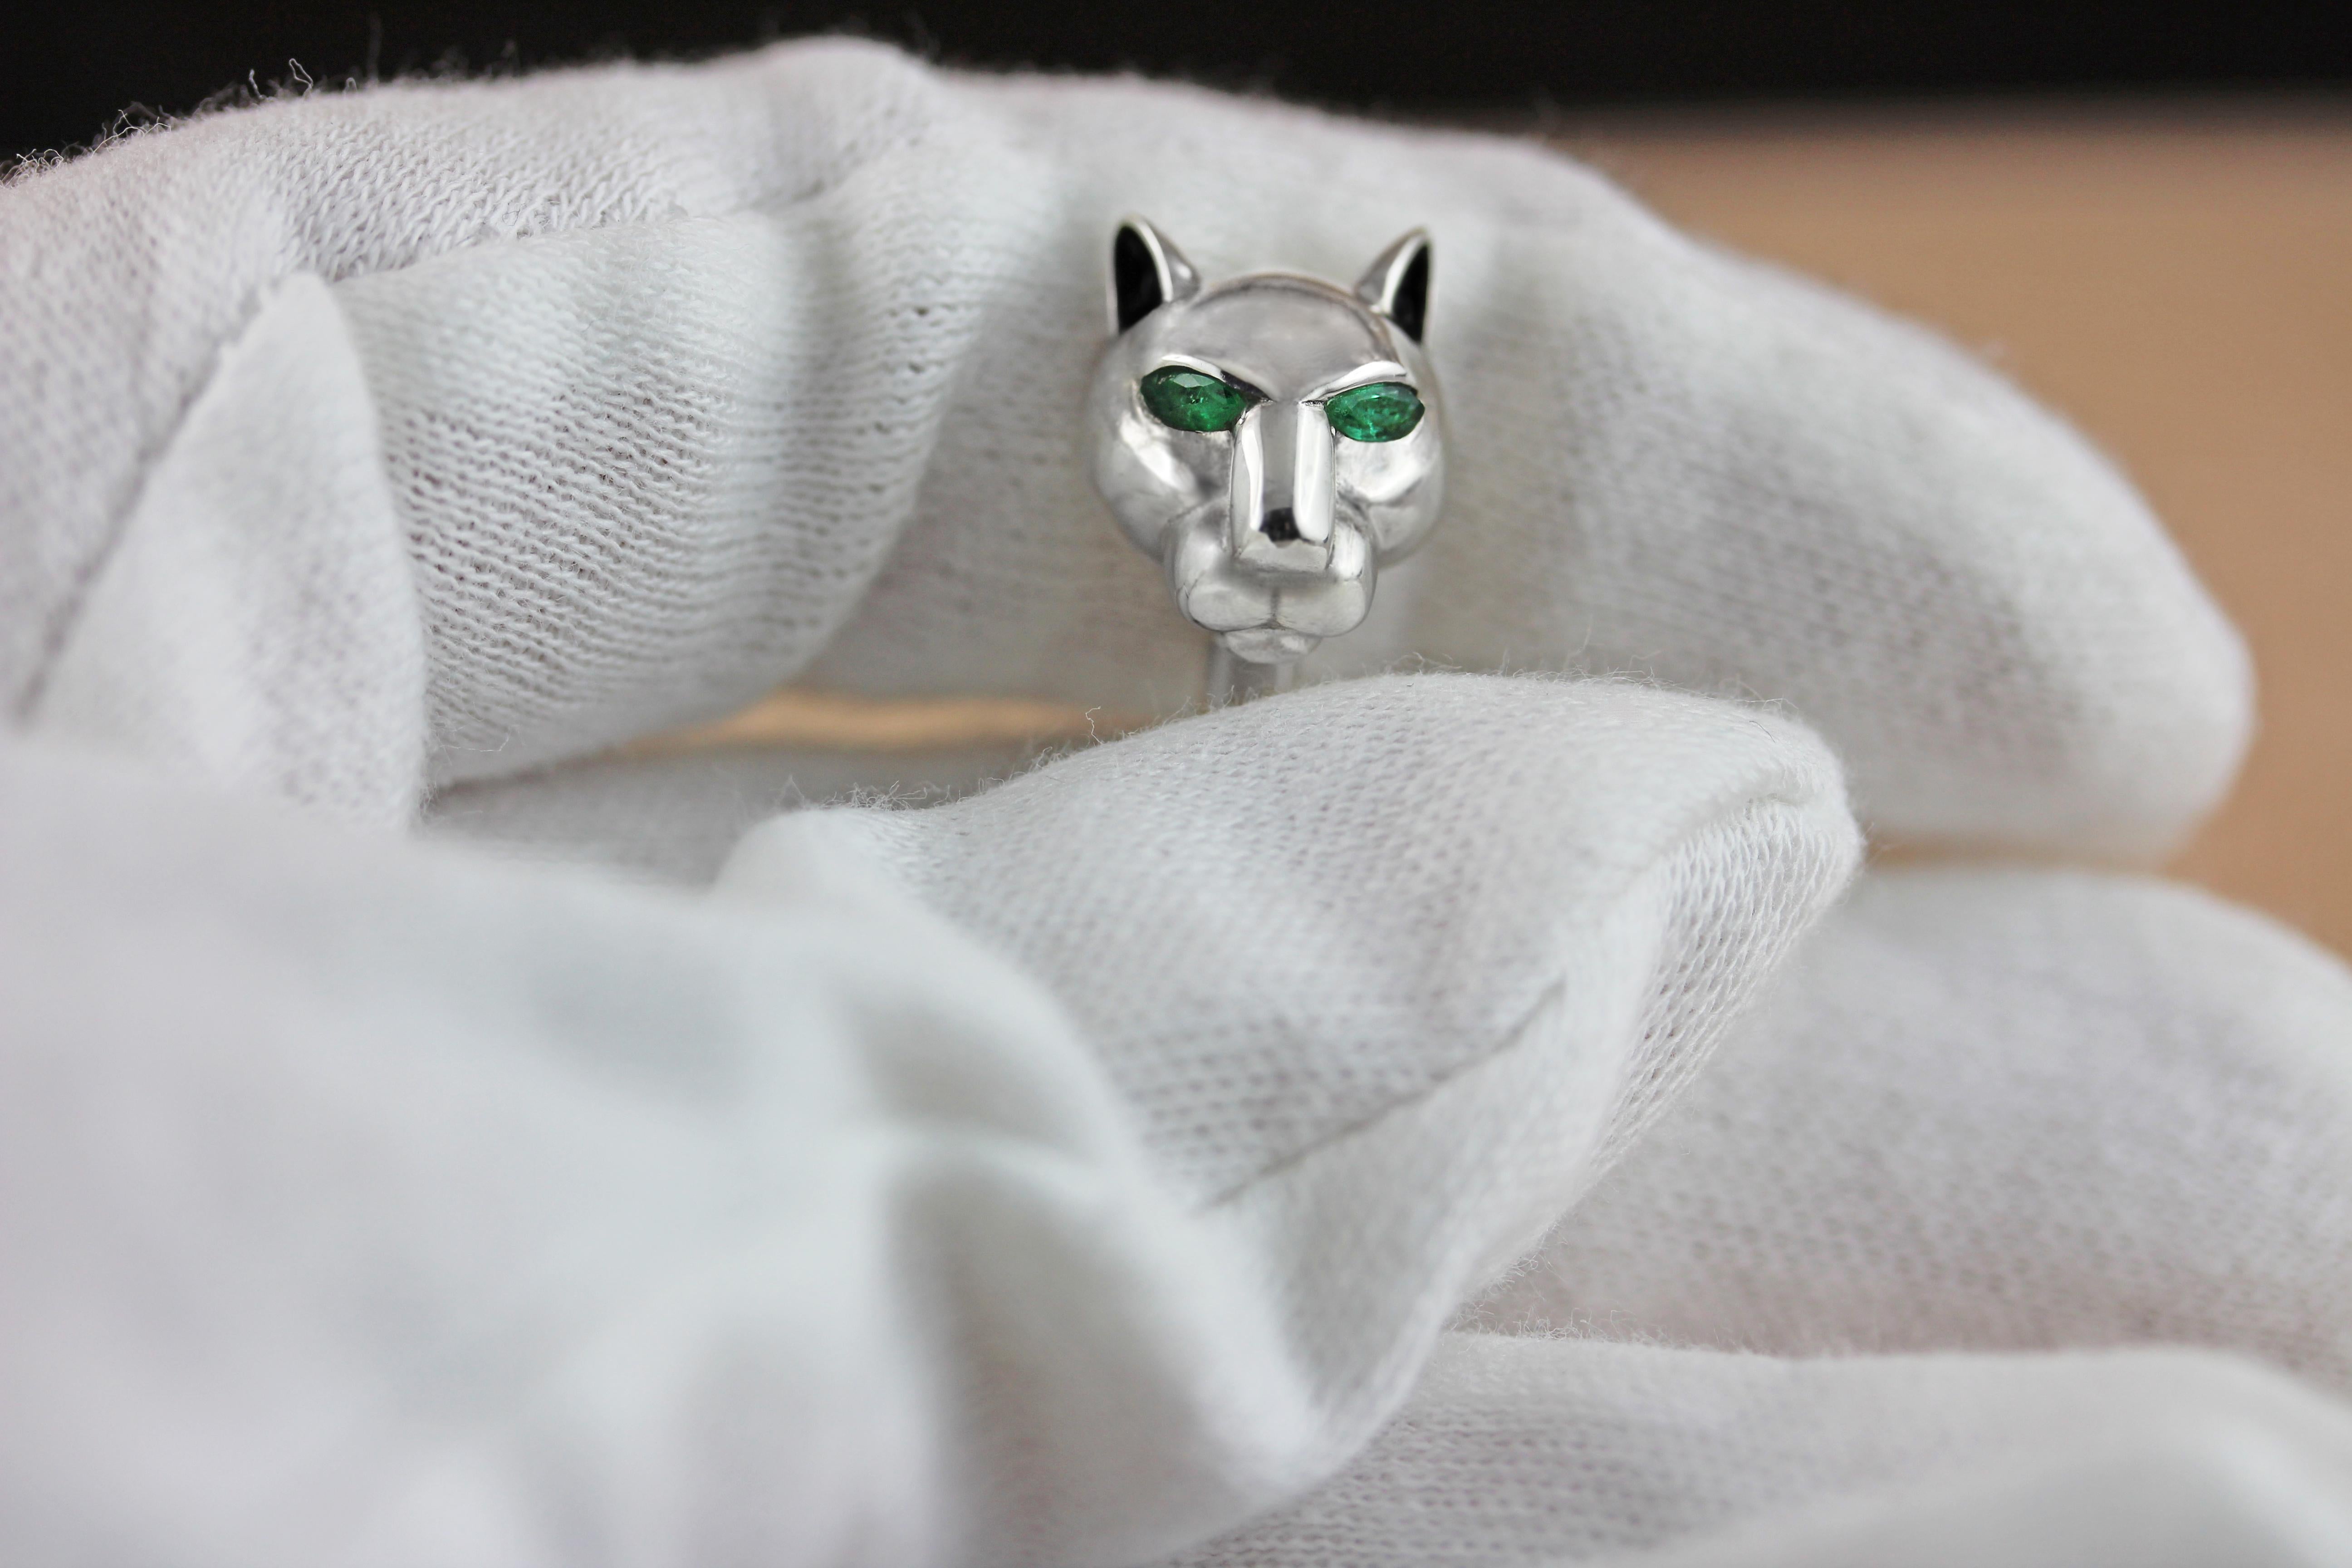 Silver 925 panther cufflinks embellished by emeralds on his eyes and a half sphere in malachite , ears with black enamel.

All AVGVSTA jewelry is new and has never been previously owned or worn. 
Each item will arrive beautifully gift wrapped in a